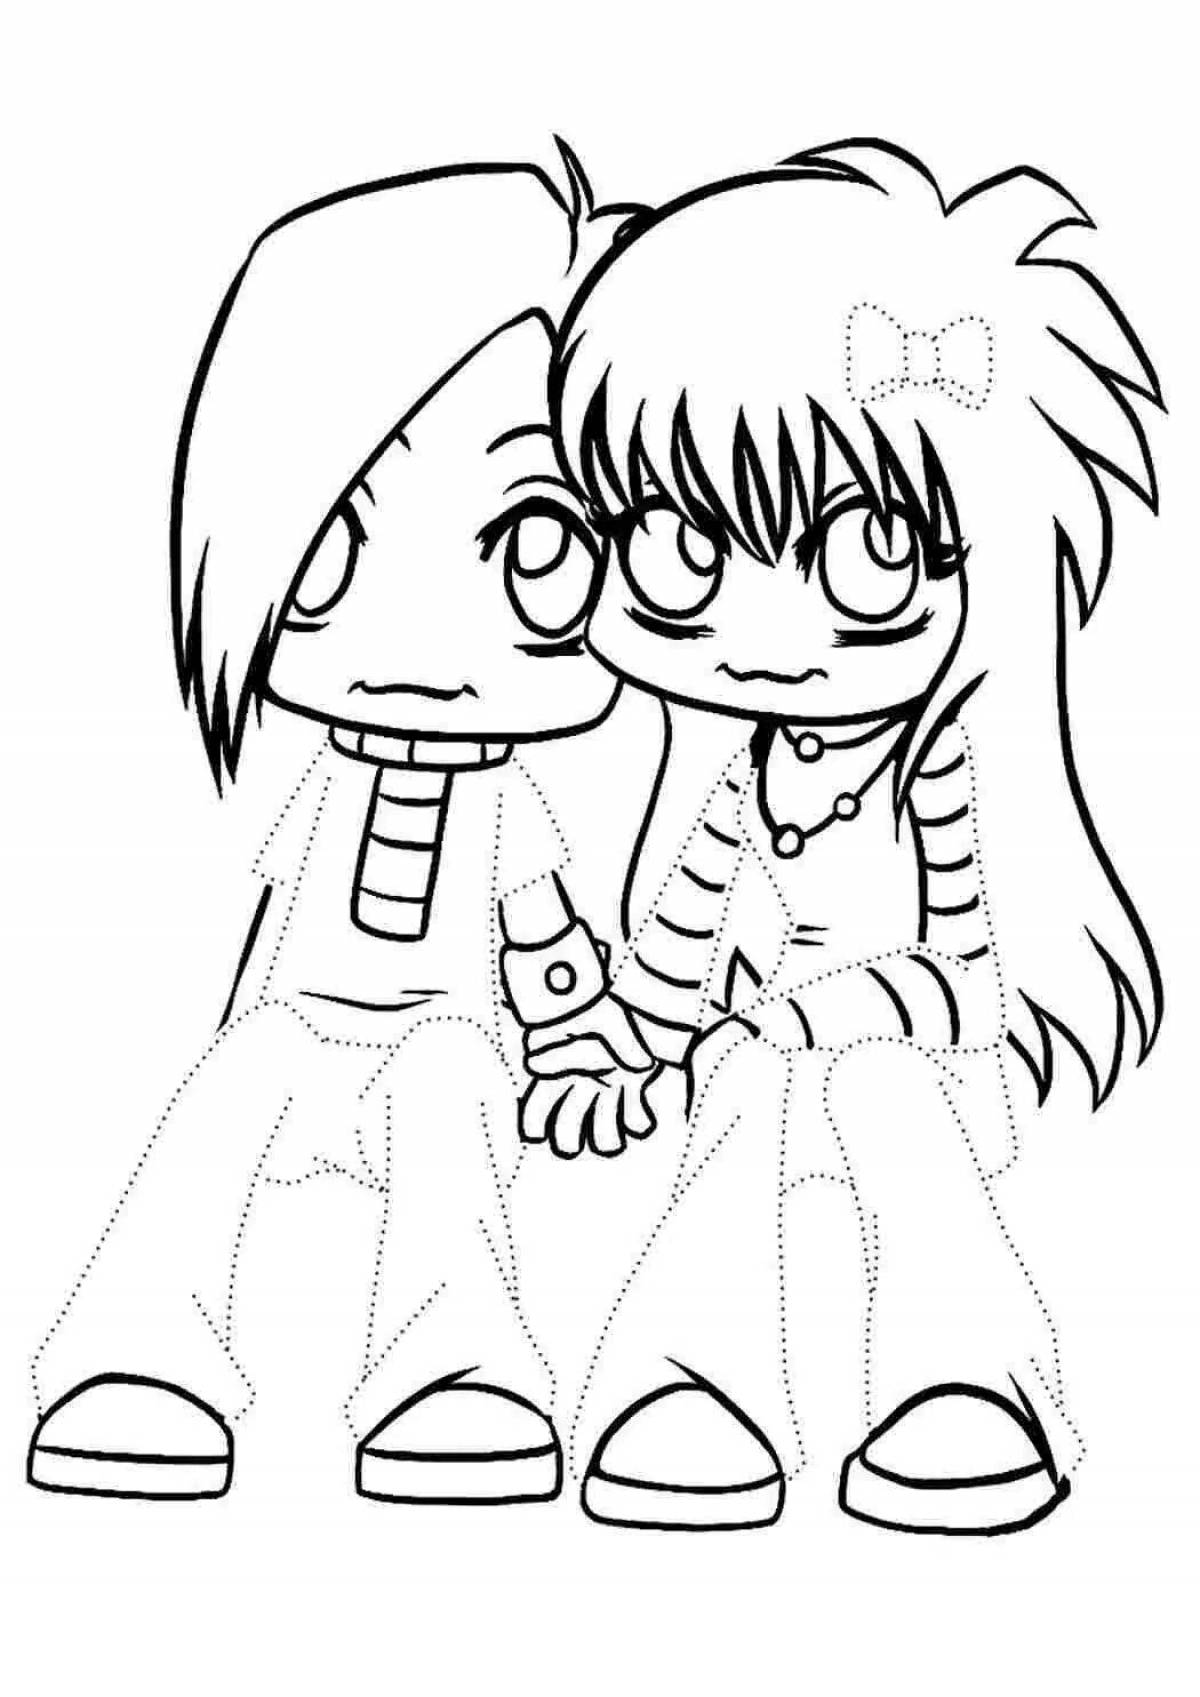 Colorful anime boy and girl coloring page